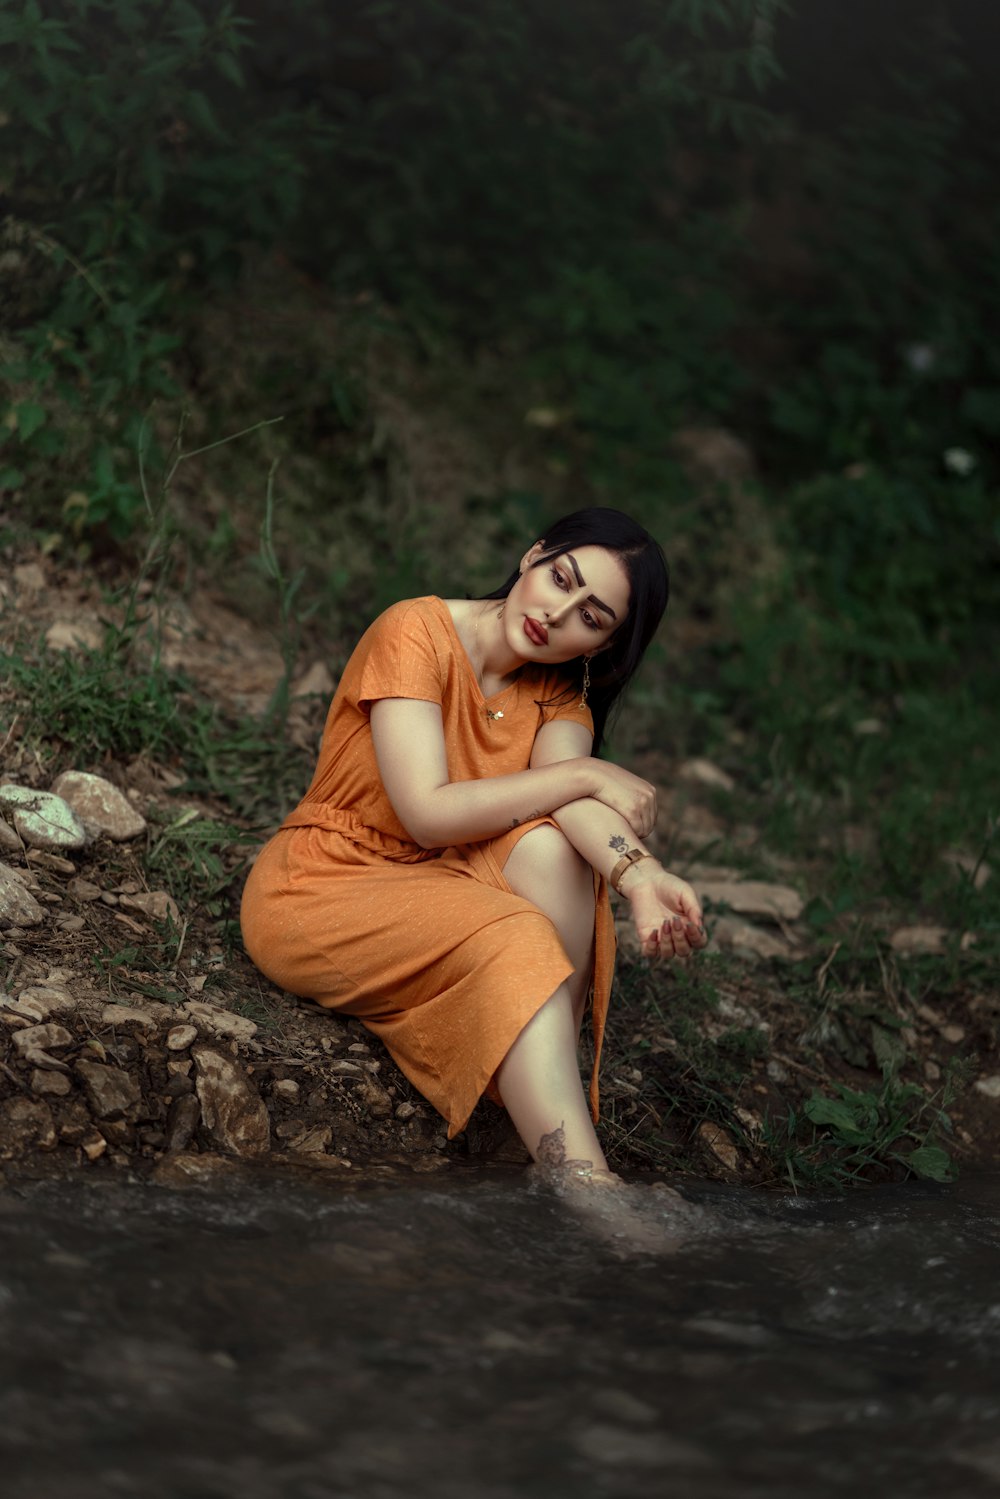 a woman in an orange dress sitting on the ground